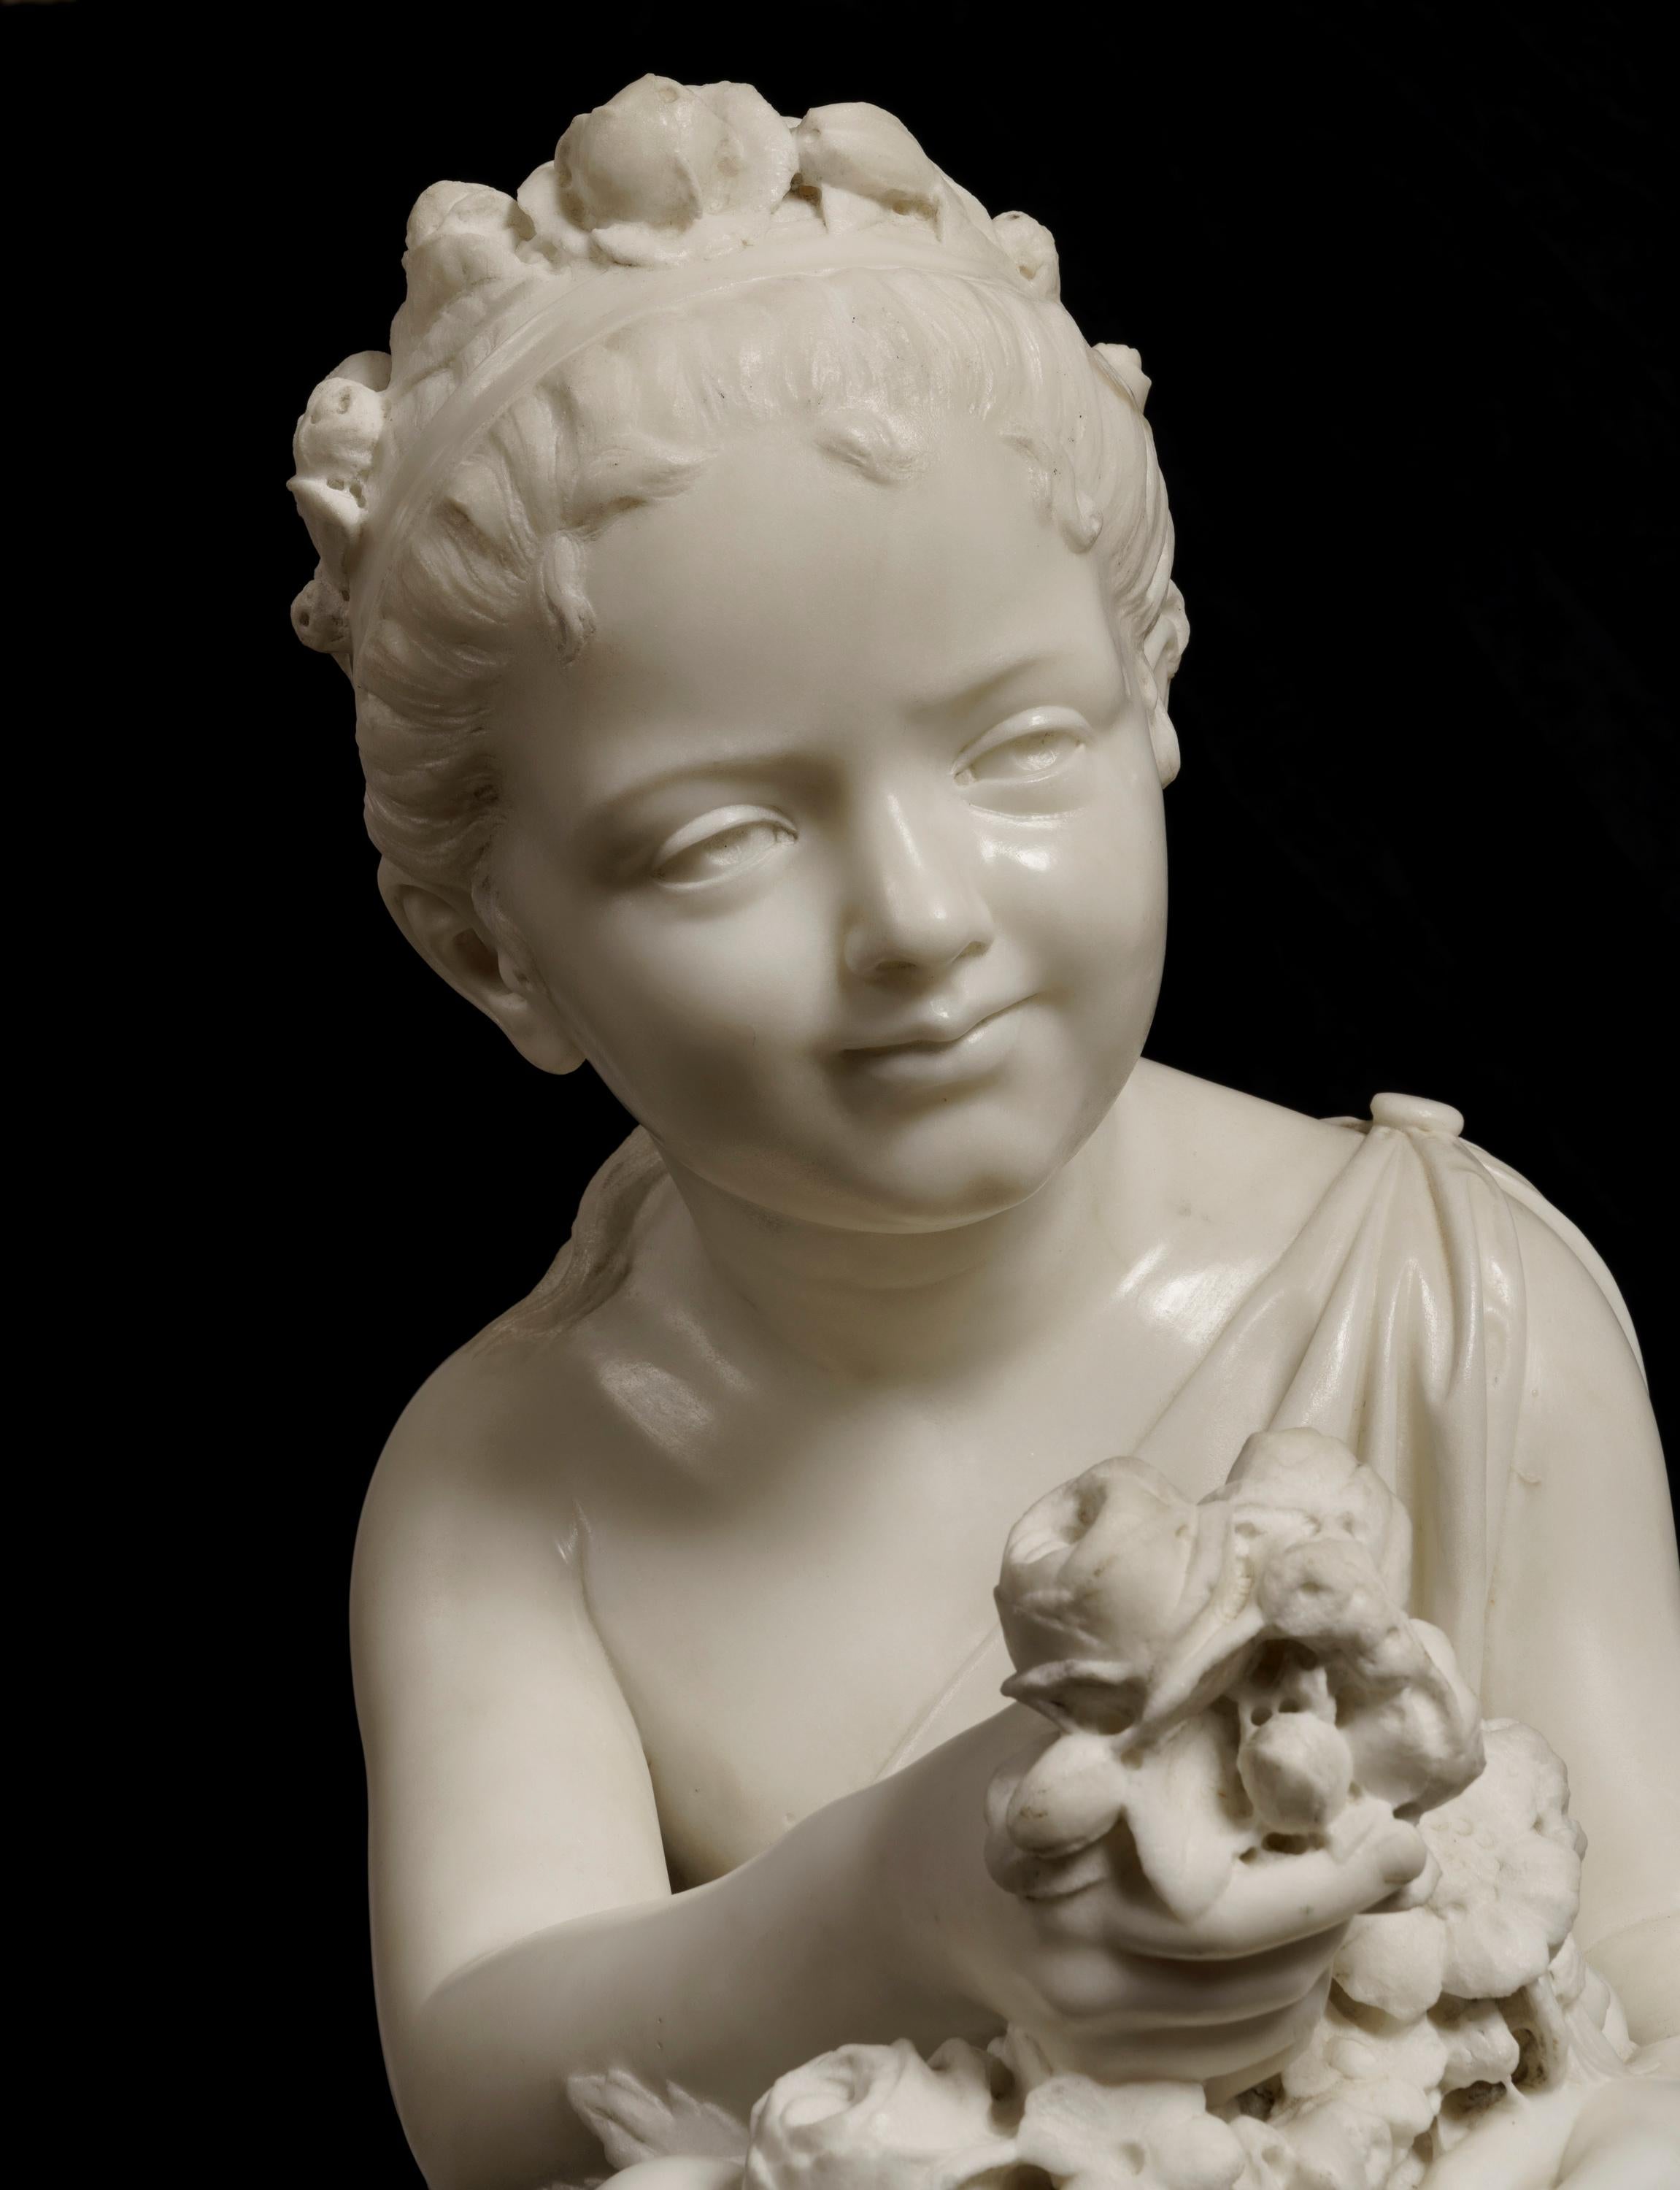 A carved white marble figure of a flower girl
Signed to base 'Monti'

Modelled as a young girl, dressed in a classical toga with generous billowing folds, sat on a rocky outcrop holding a basket of flowers, with one hand outstretched offering a